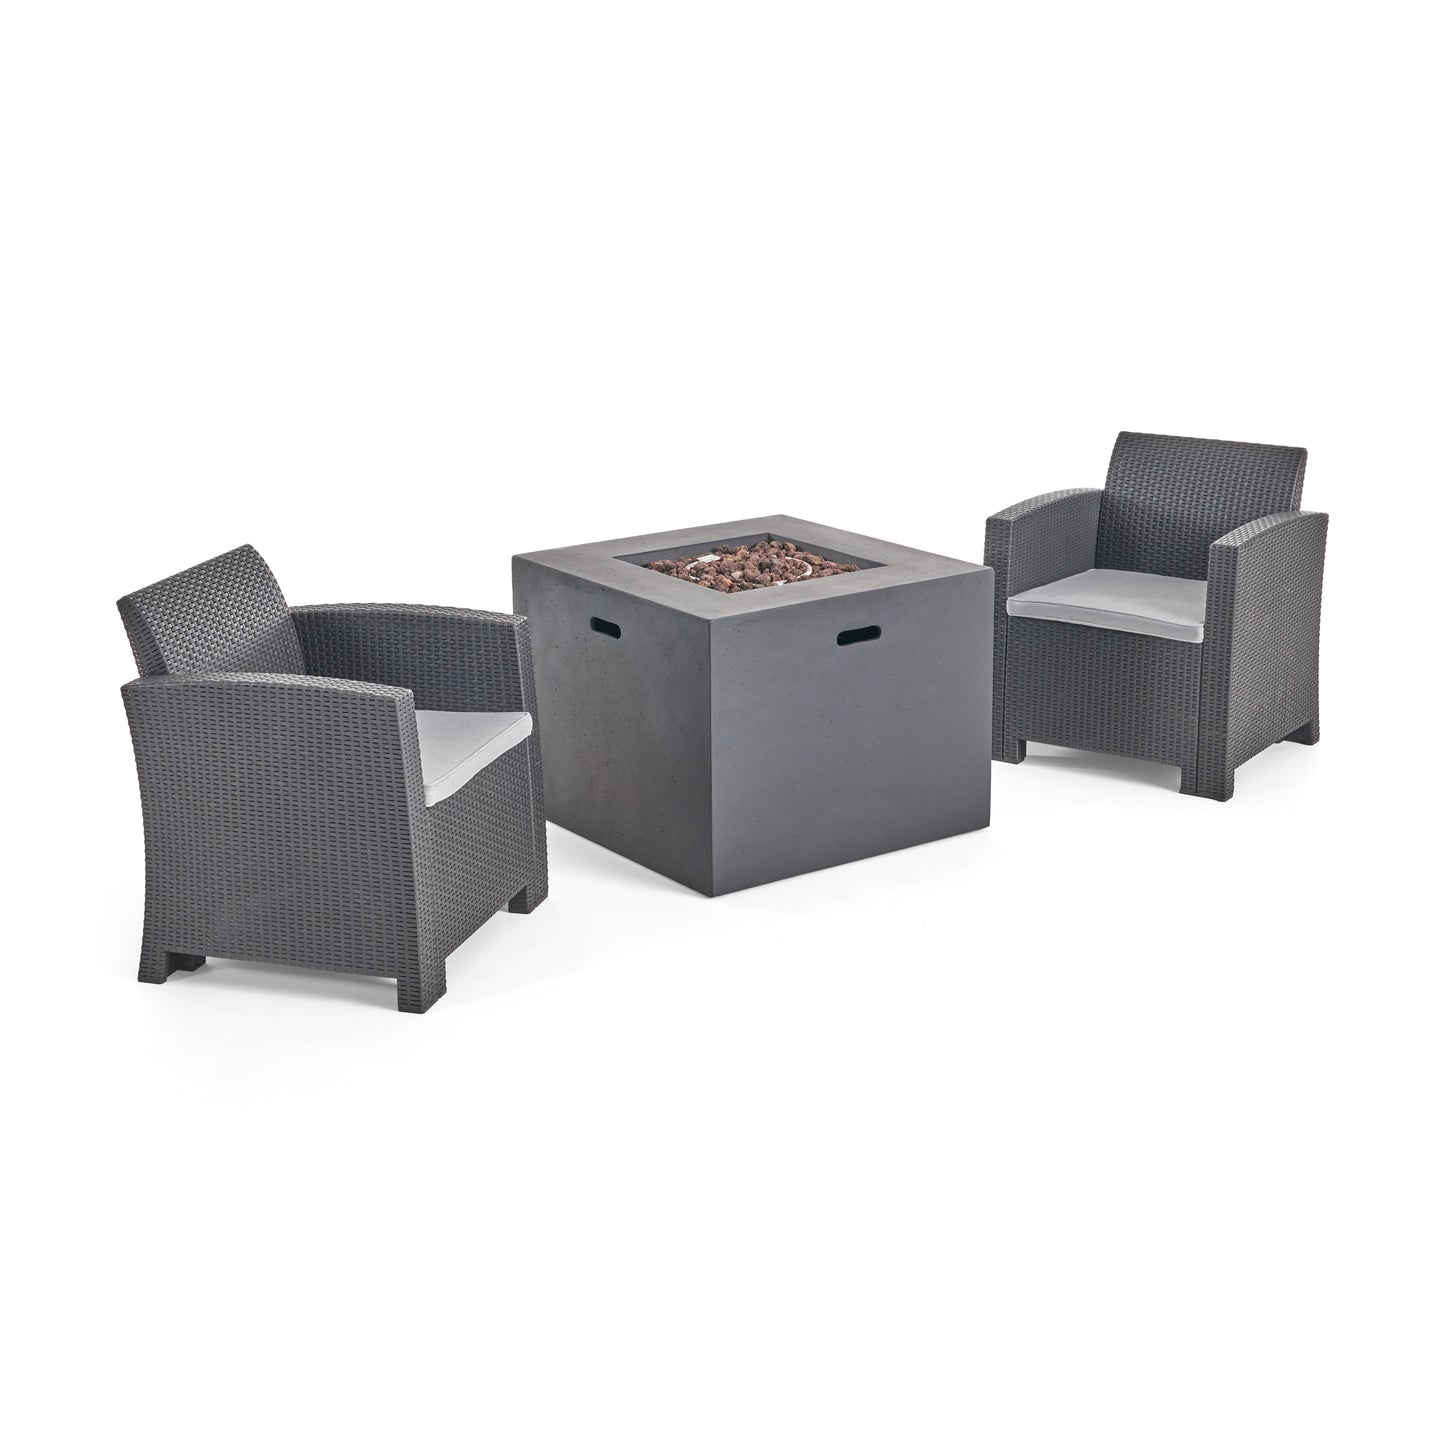 Halston Outdoor 2-Seater Wicker Print Club Chair Chat Set with Propane Fire Pit